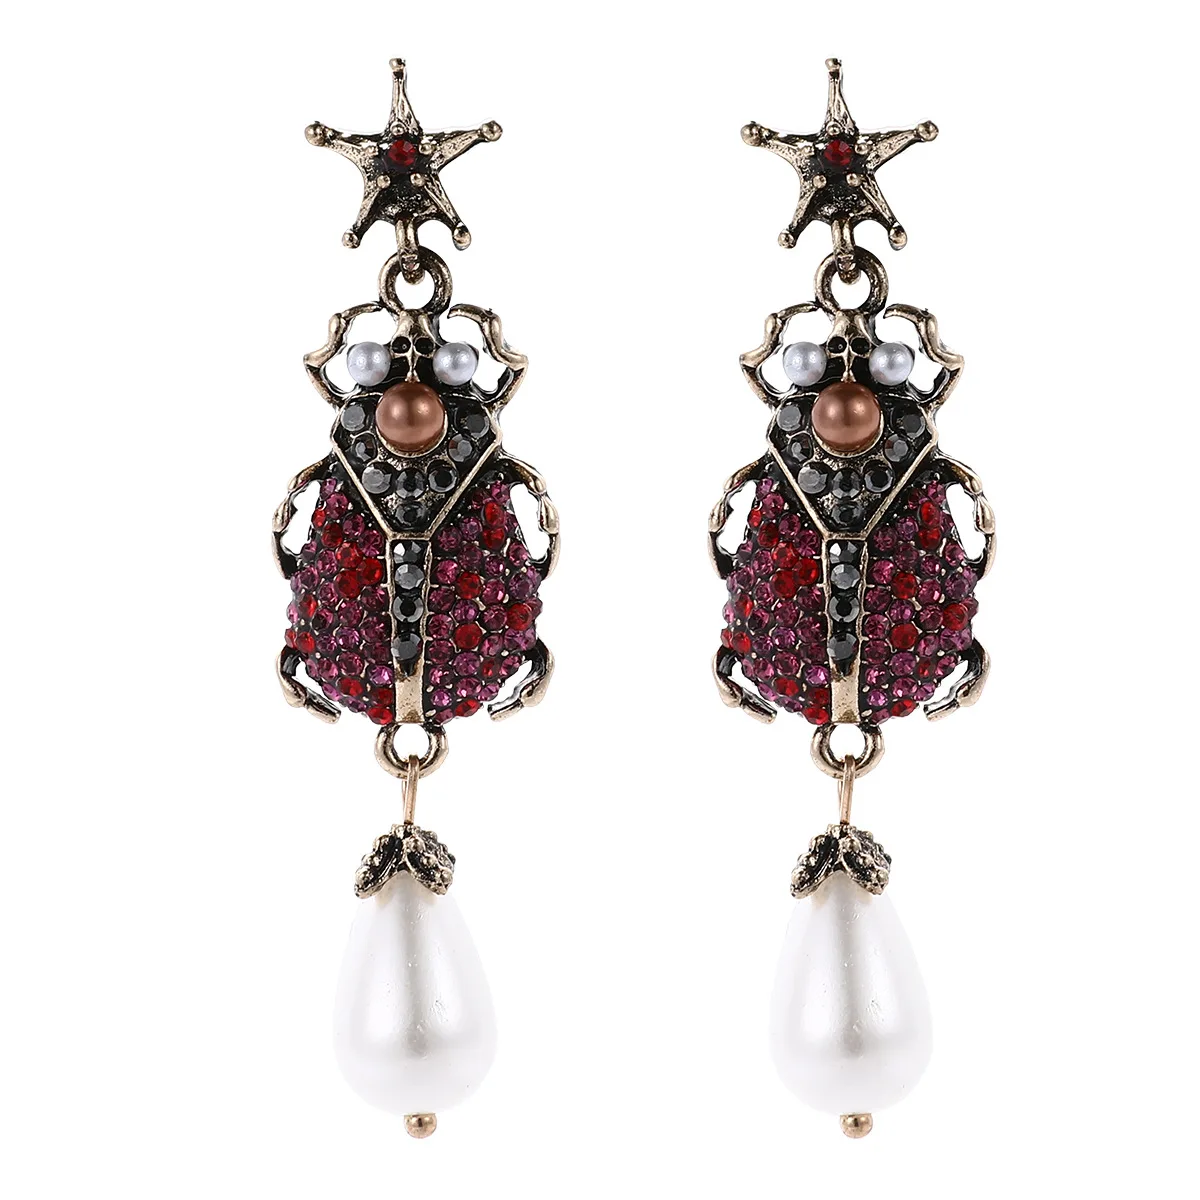 

2023 Antique Gold Plated Jewelry Art Deco Skull Insect Scarab Beetle Star Crystal Vintage Pearl Statement Earrings for Women